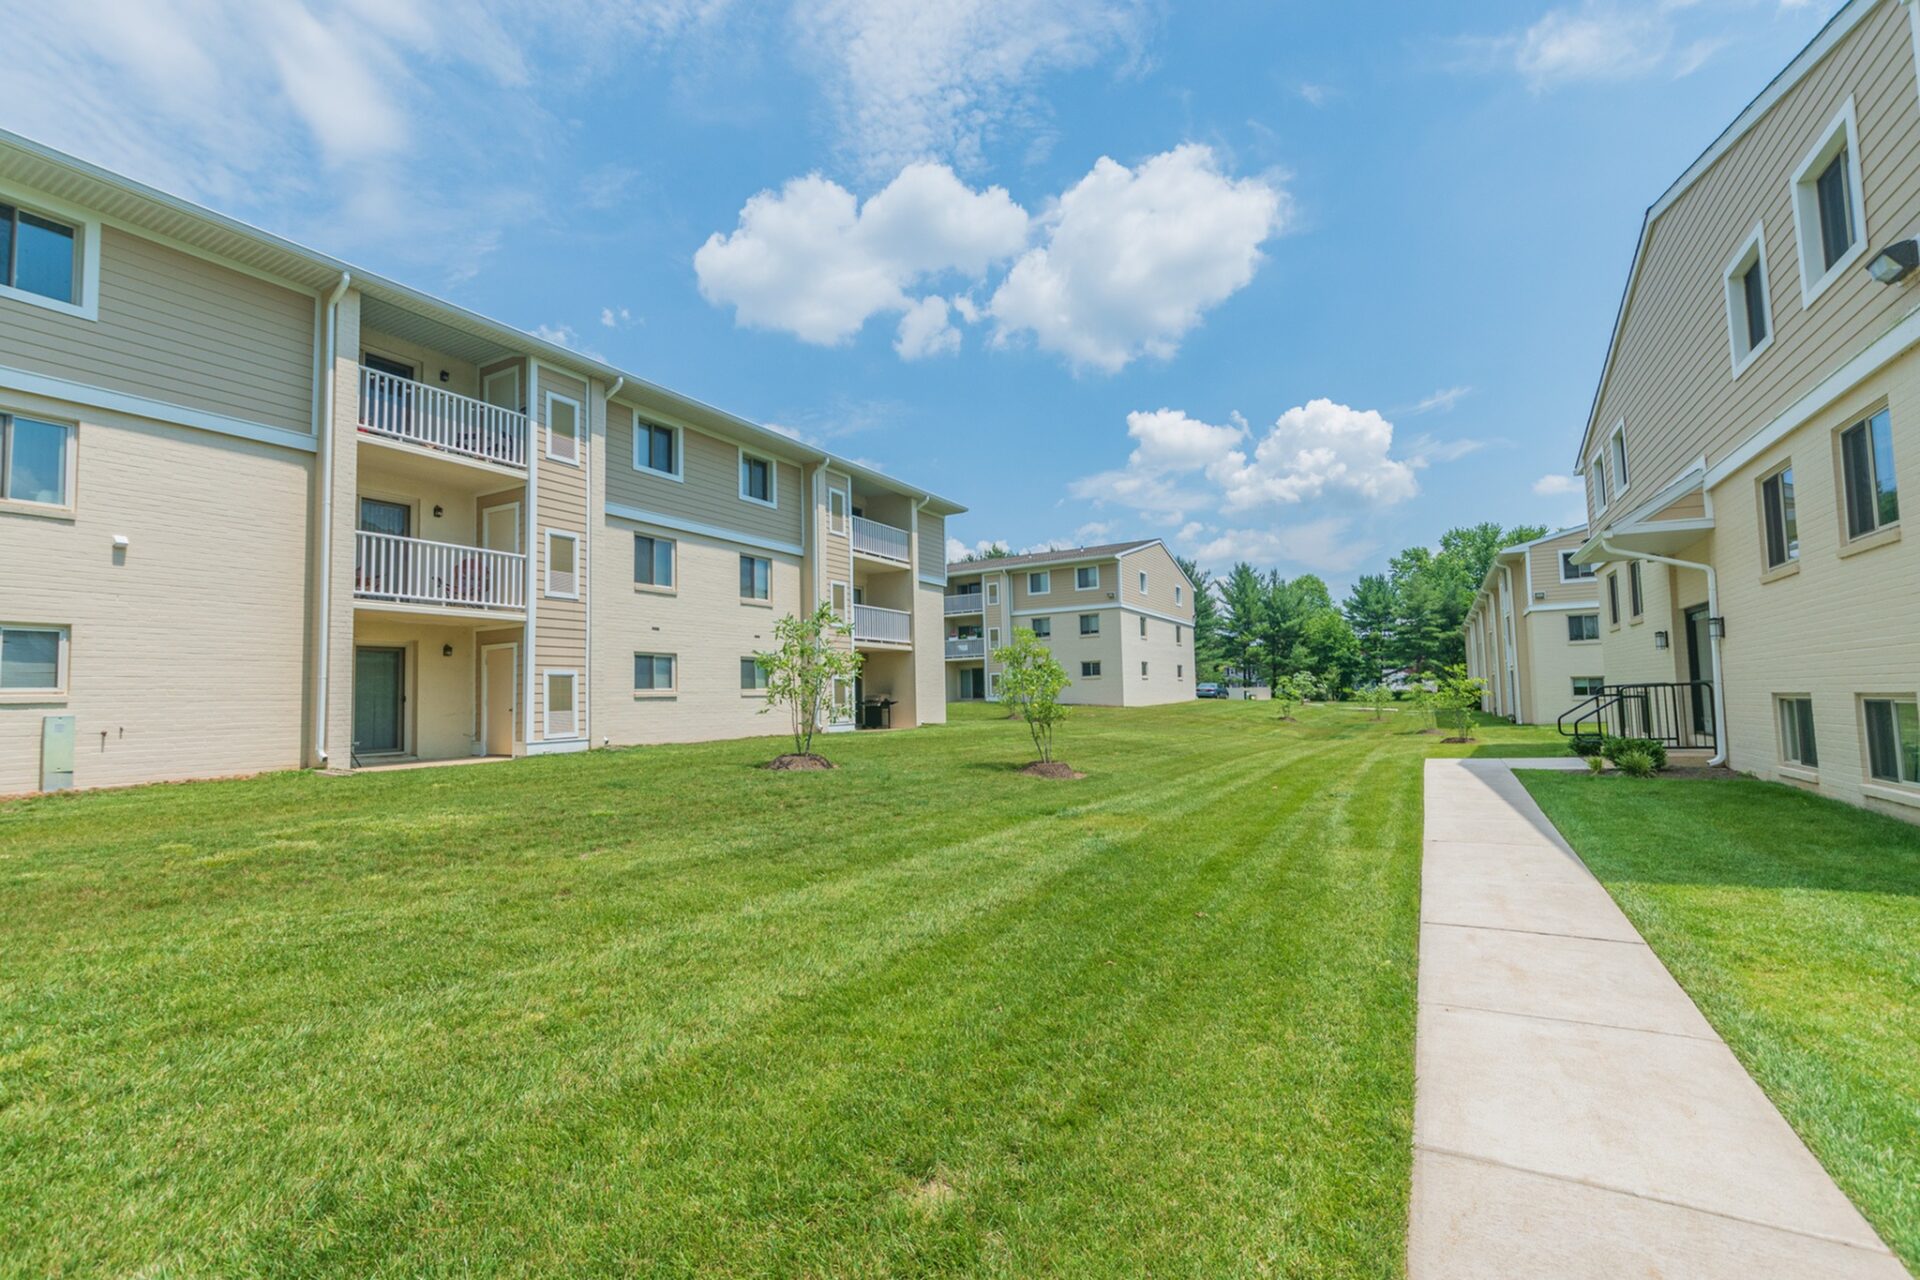 Lawn and walkway area of our community at Caln East apartments